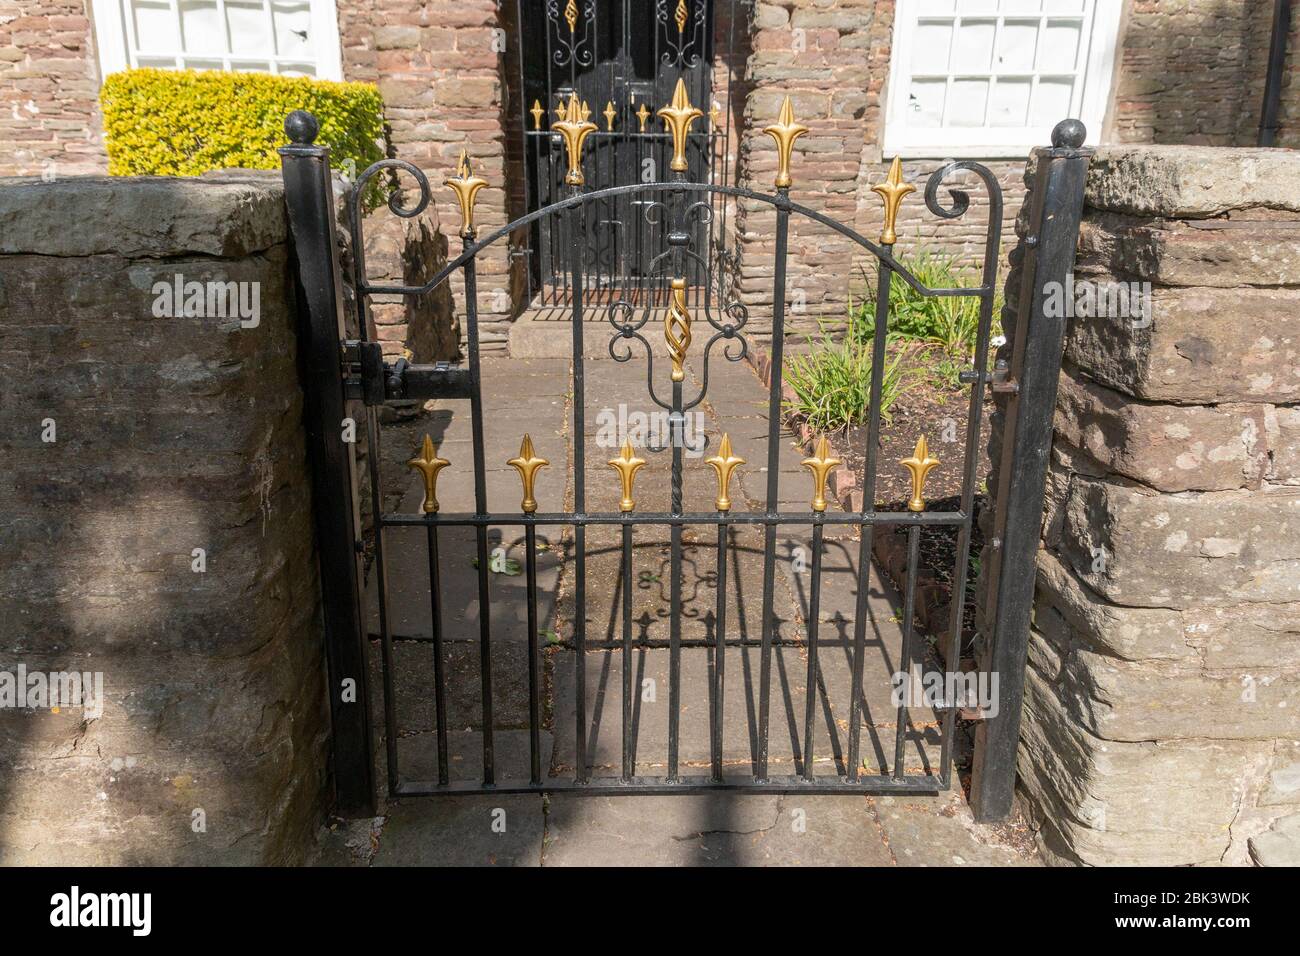 a close up view of a small black metal gate with gold spikes on attached to a stone wall Stock Photo